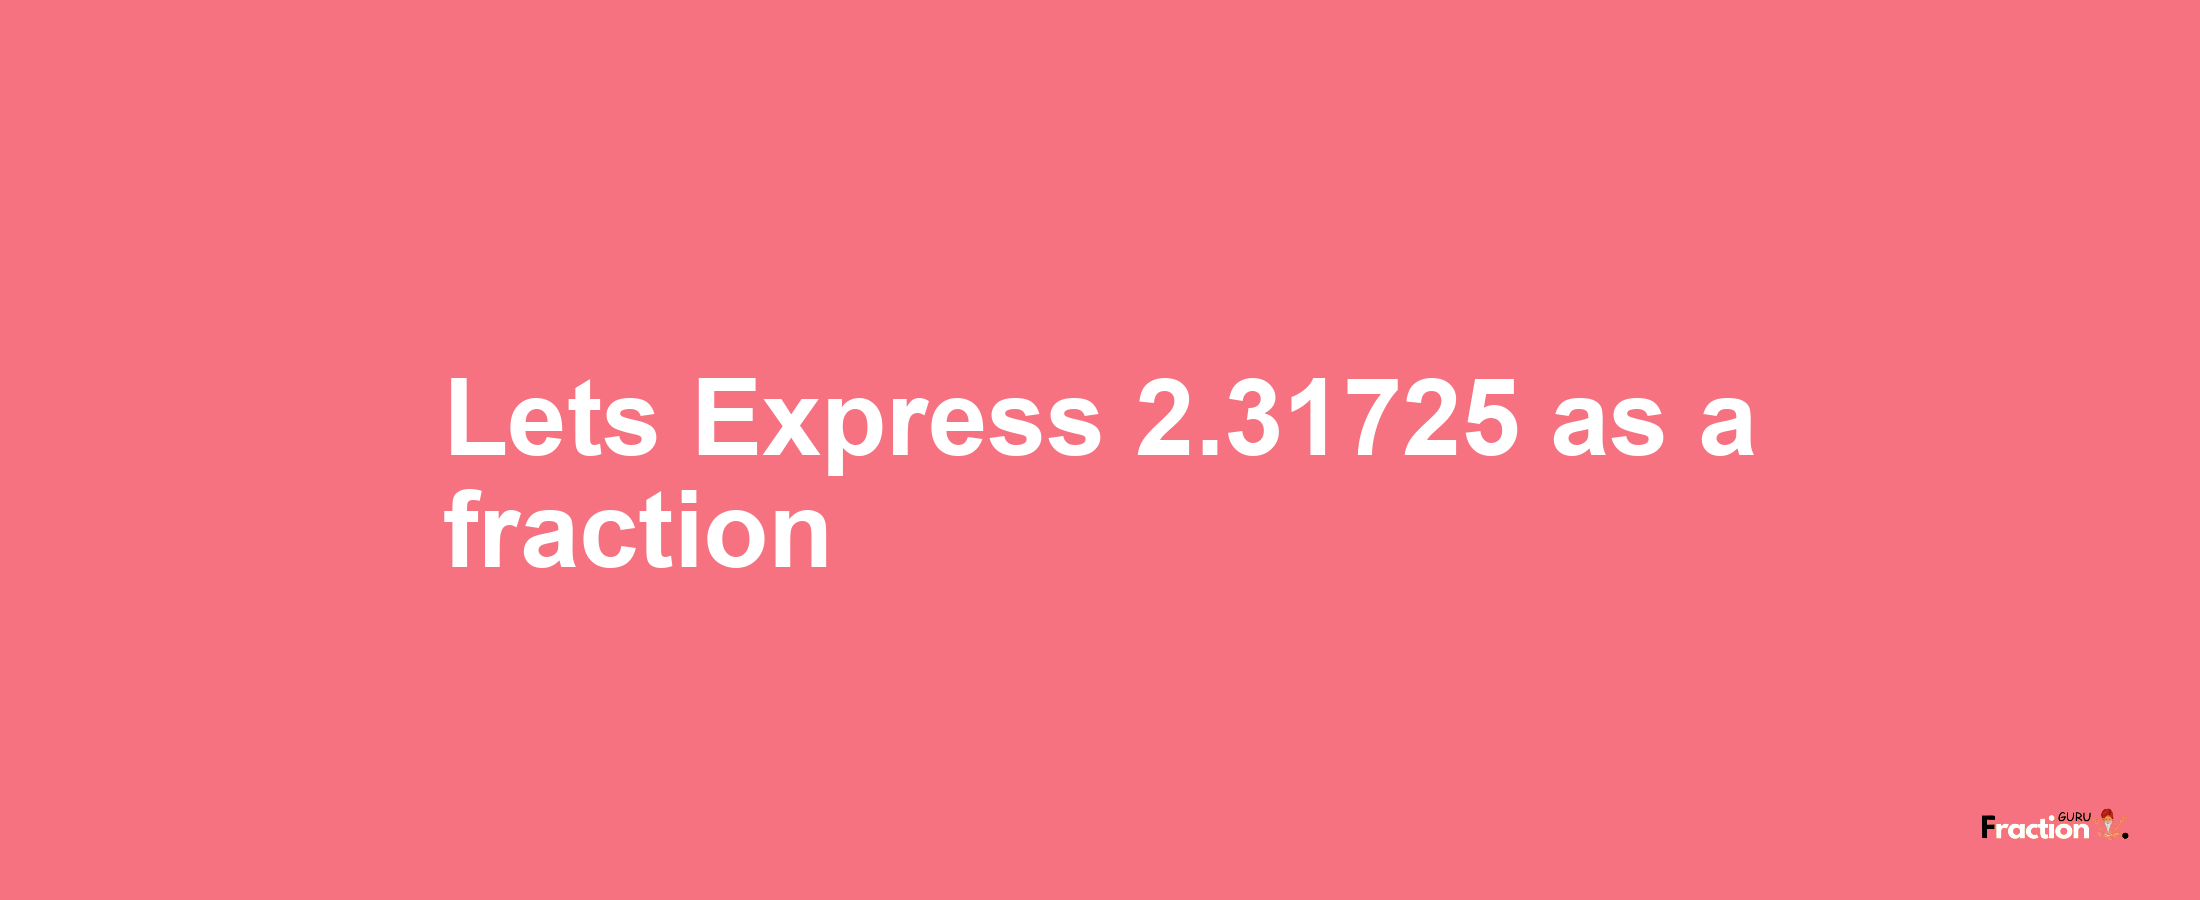 Lets Express 2.31725 as afraction